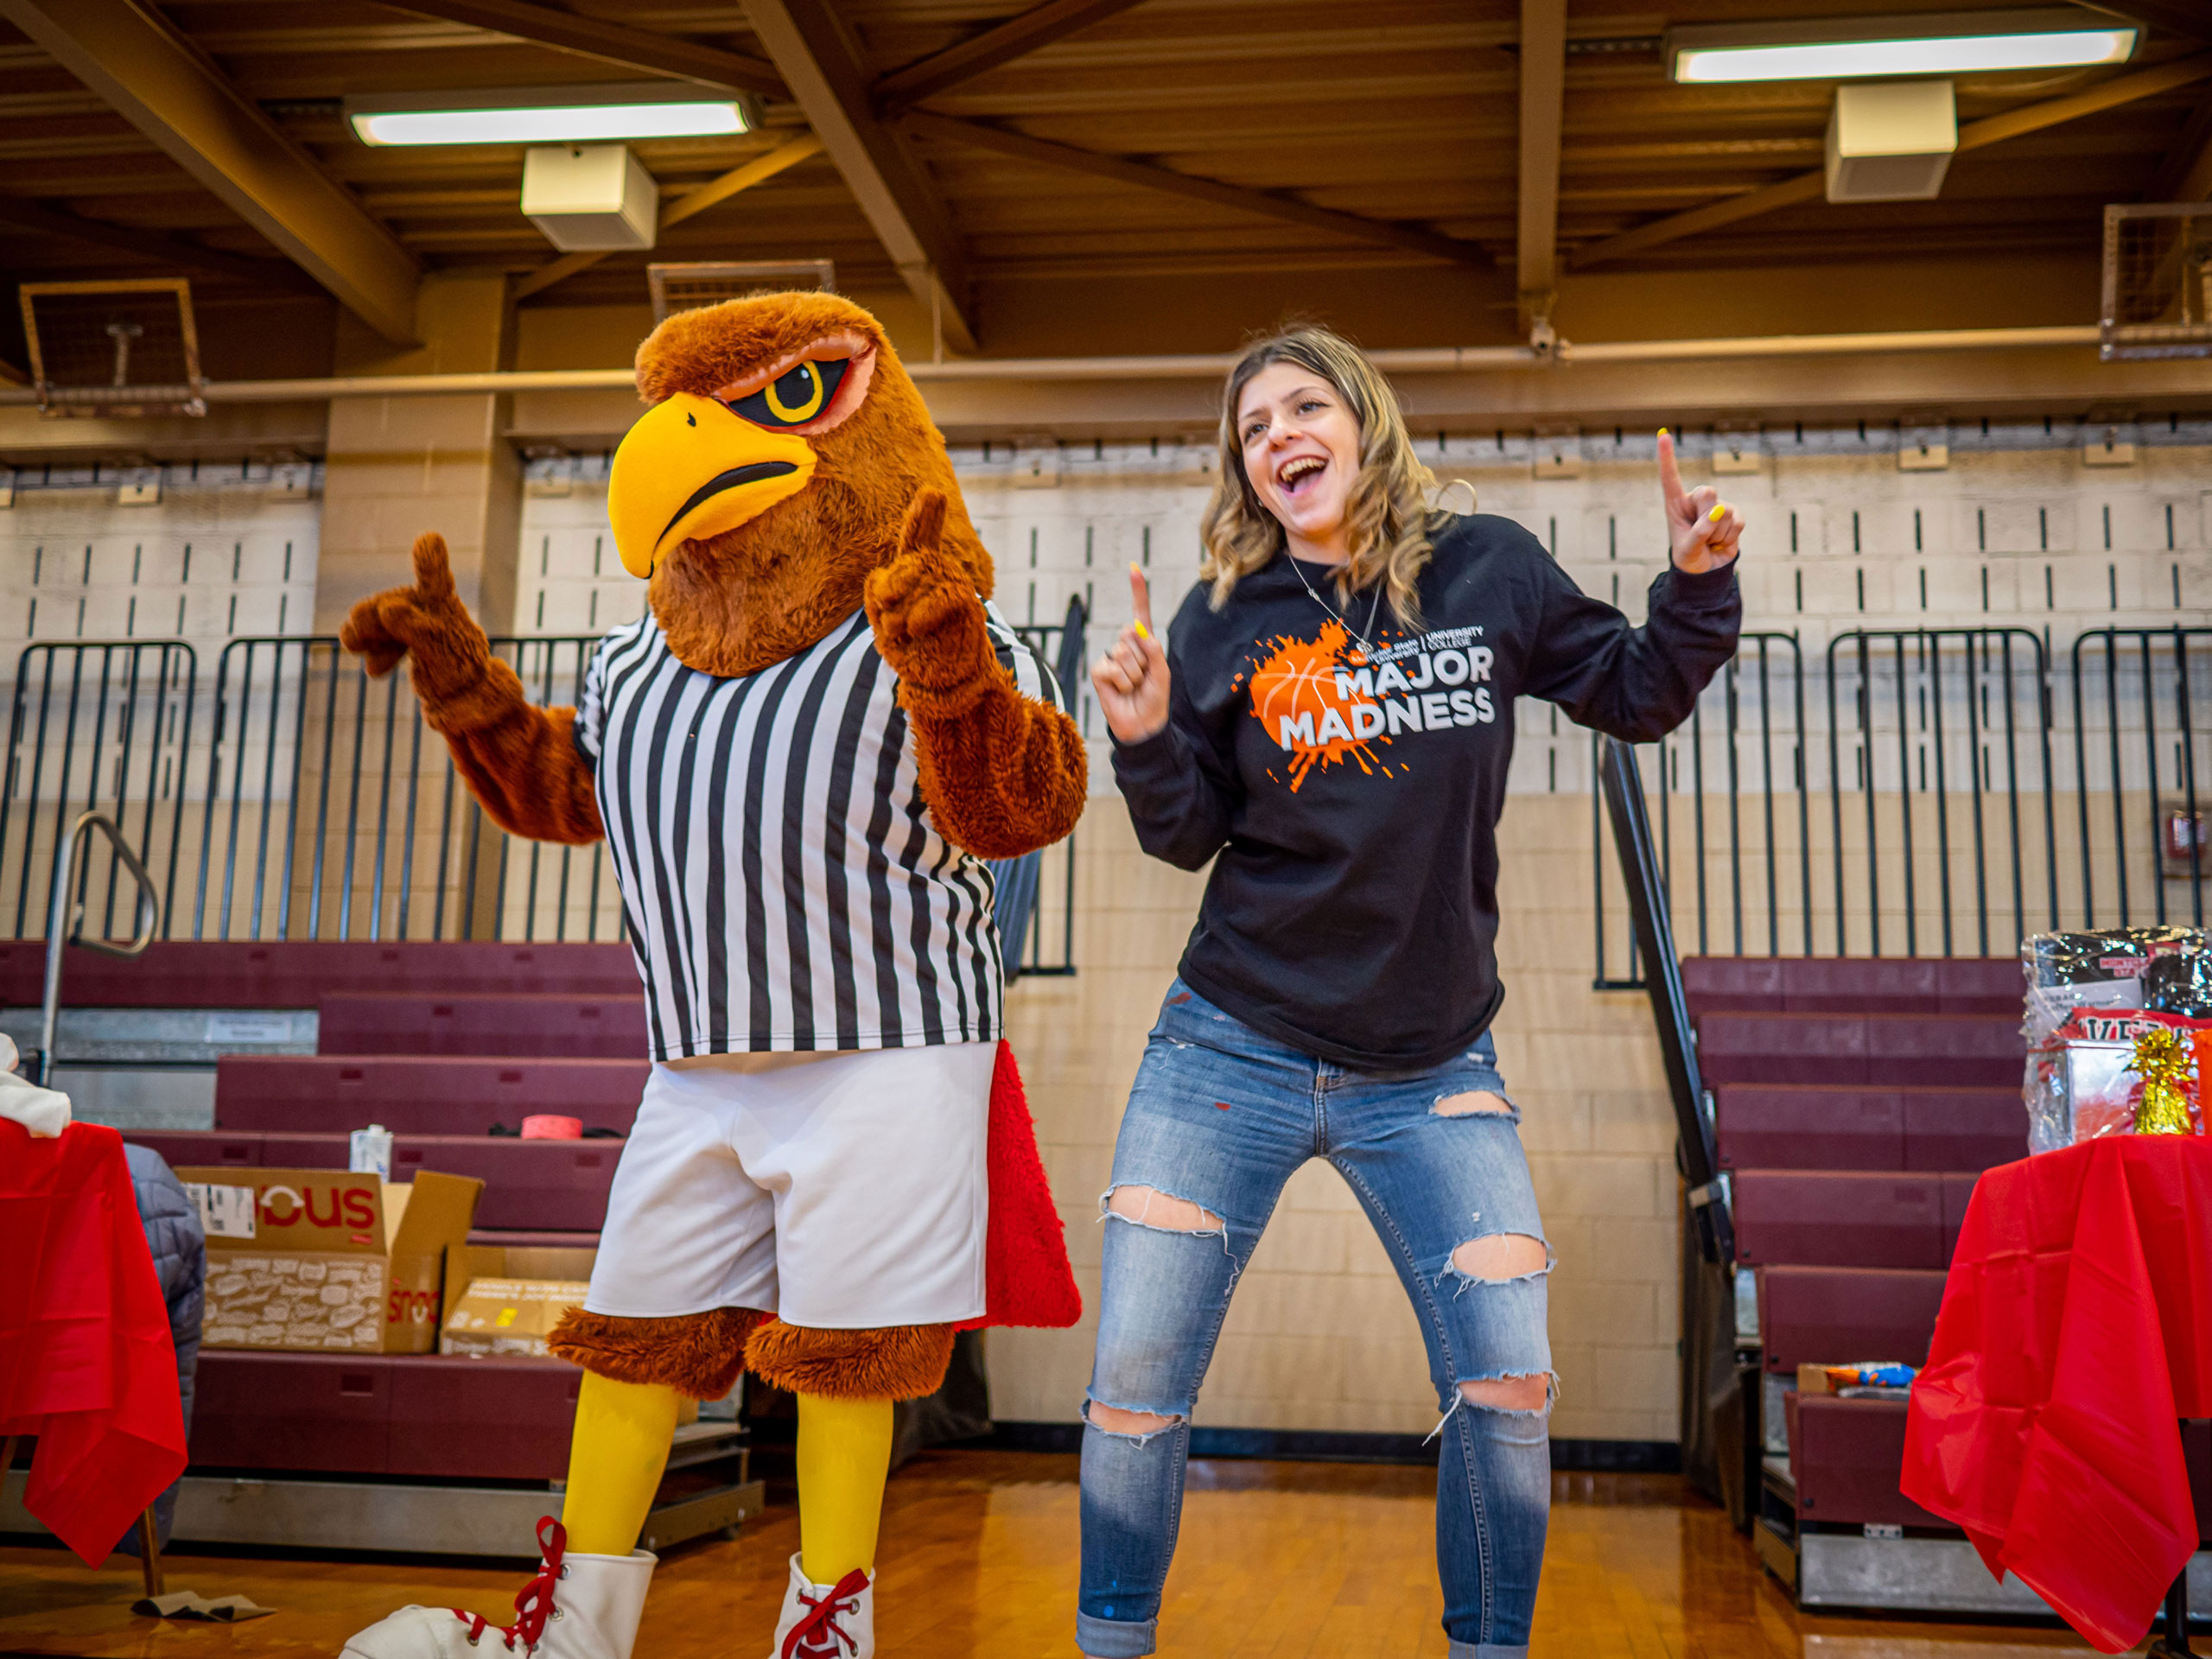 College mascot dances with a student.